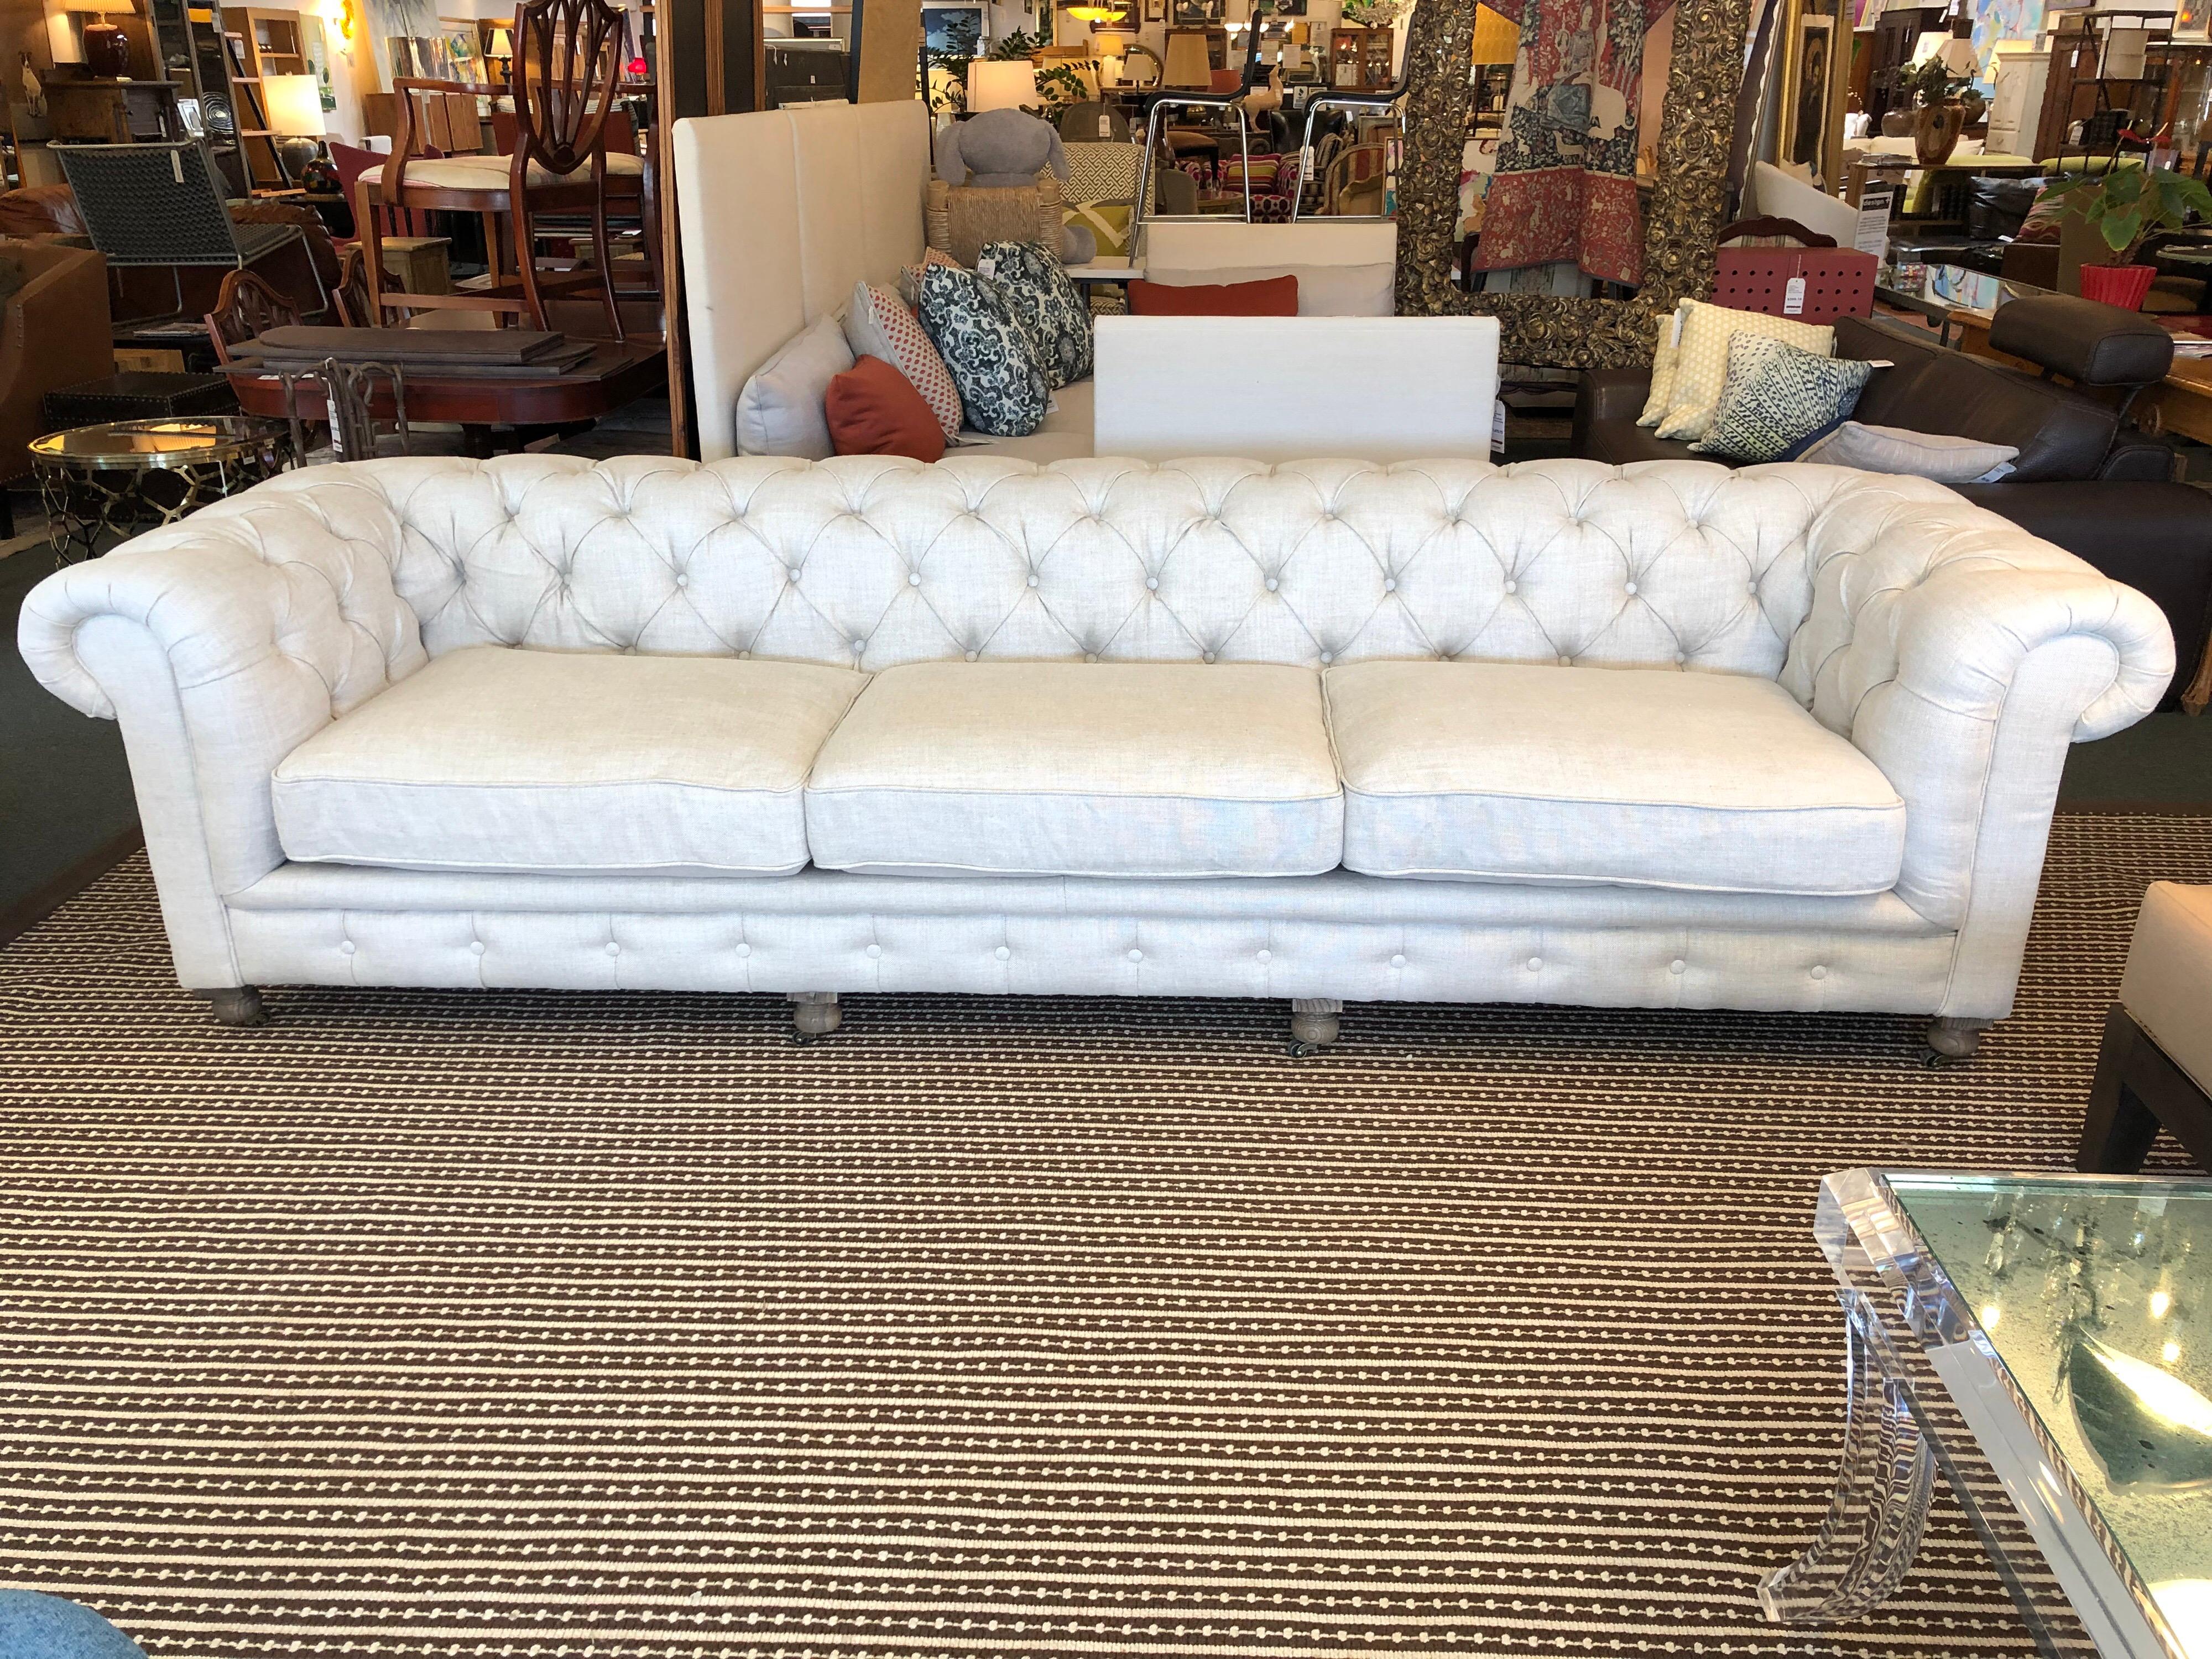 Design Plus Gallery presents fabulous Kensington sofa by Restoration Hardware.
Designed by Timothy Oulton, inspired by the Classic Chesterfield. The upholstery still evokes the style the grand gentlemen's club tradition. Deep hand-tufting and